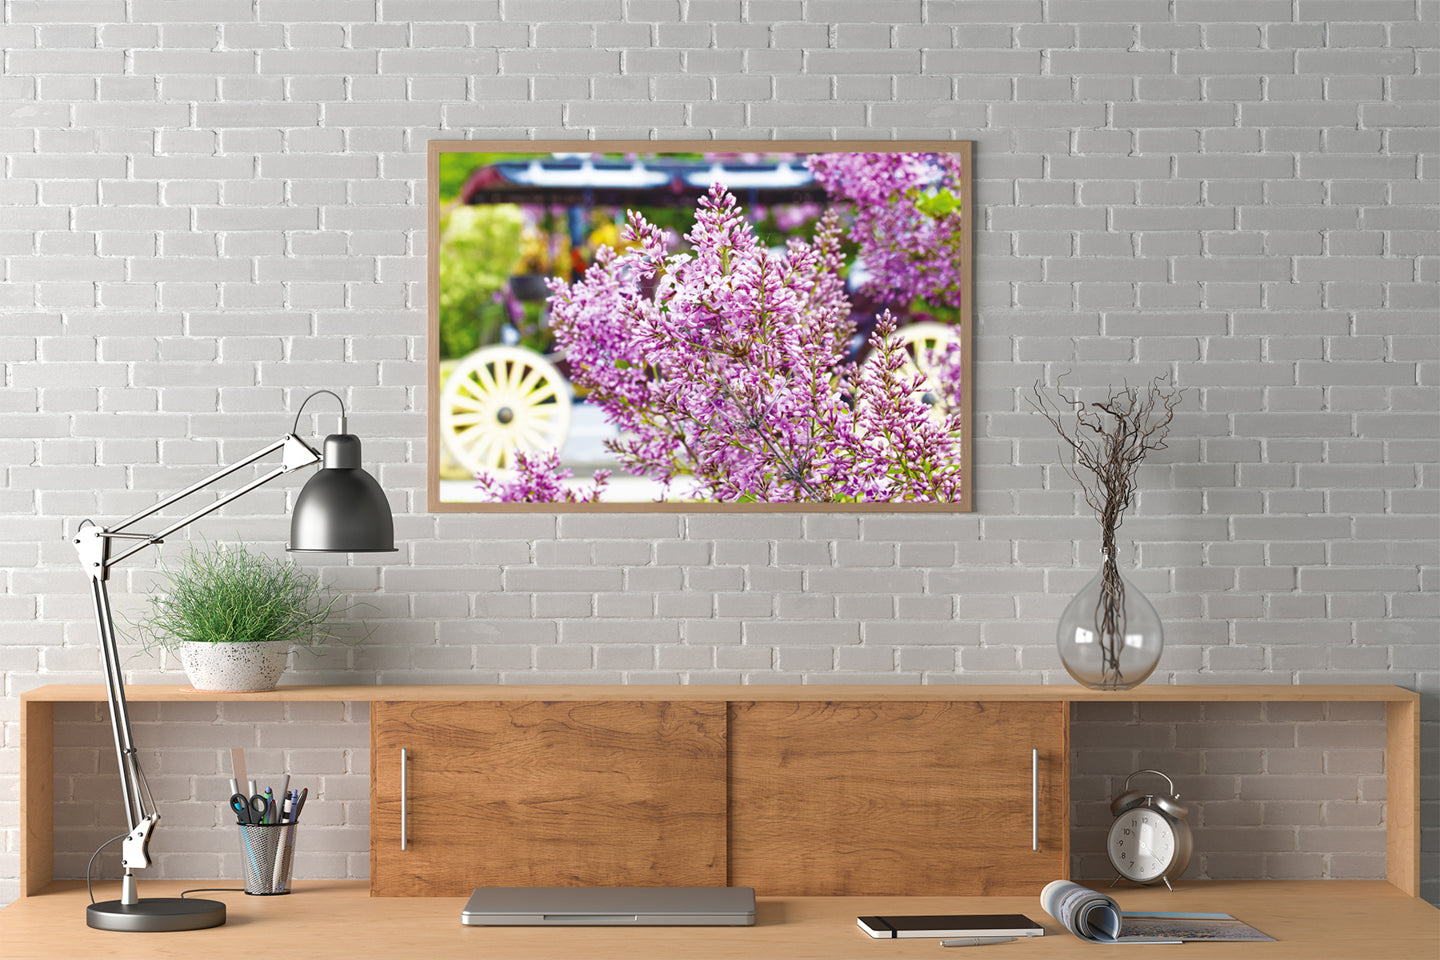 Decorate your home with Mackinac Island wall art.  This Mackinac Island photograph by Jennifer Wohletz offers a unique perspective of lilacs, which create a canopy of fragrance in June that's a delight to your senses.